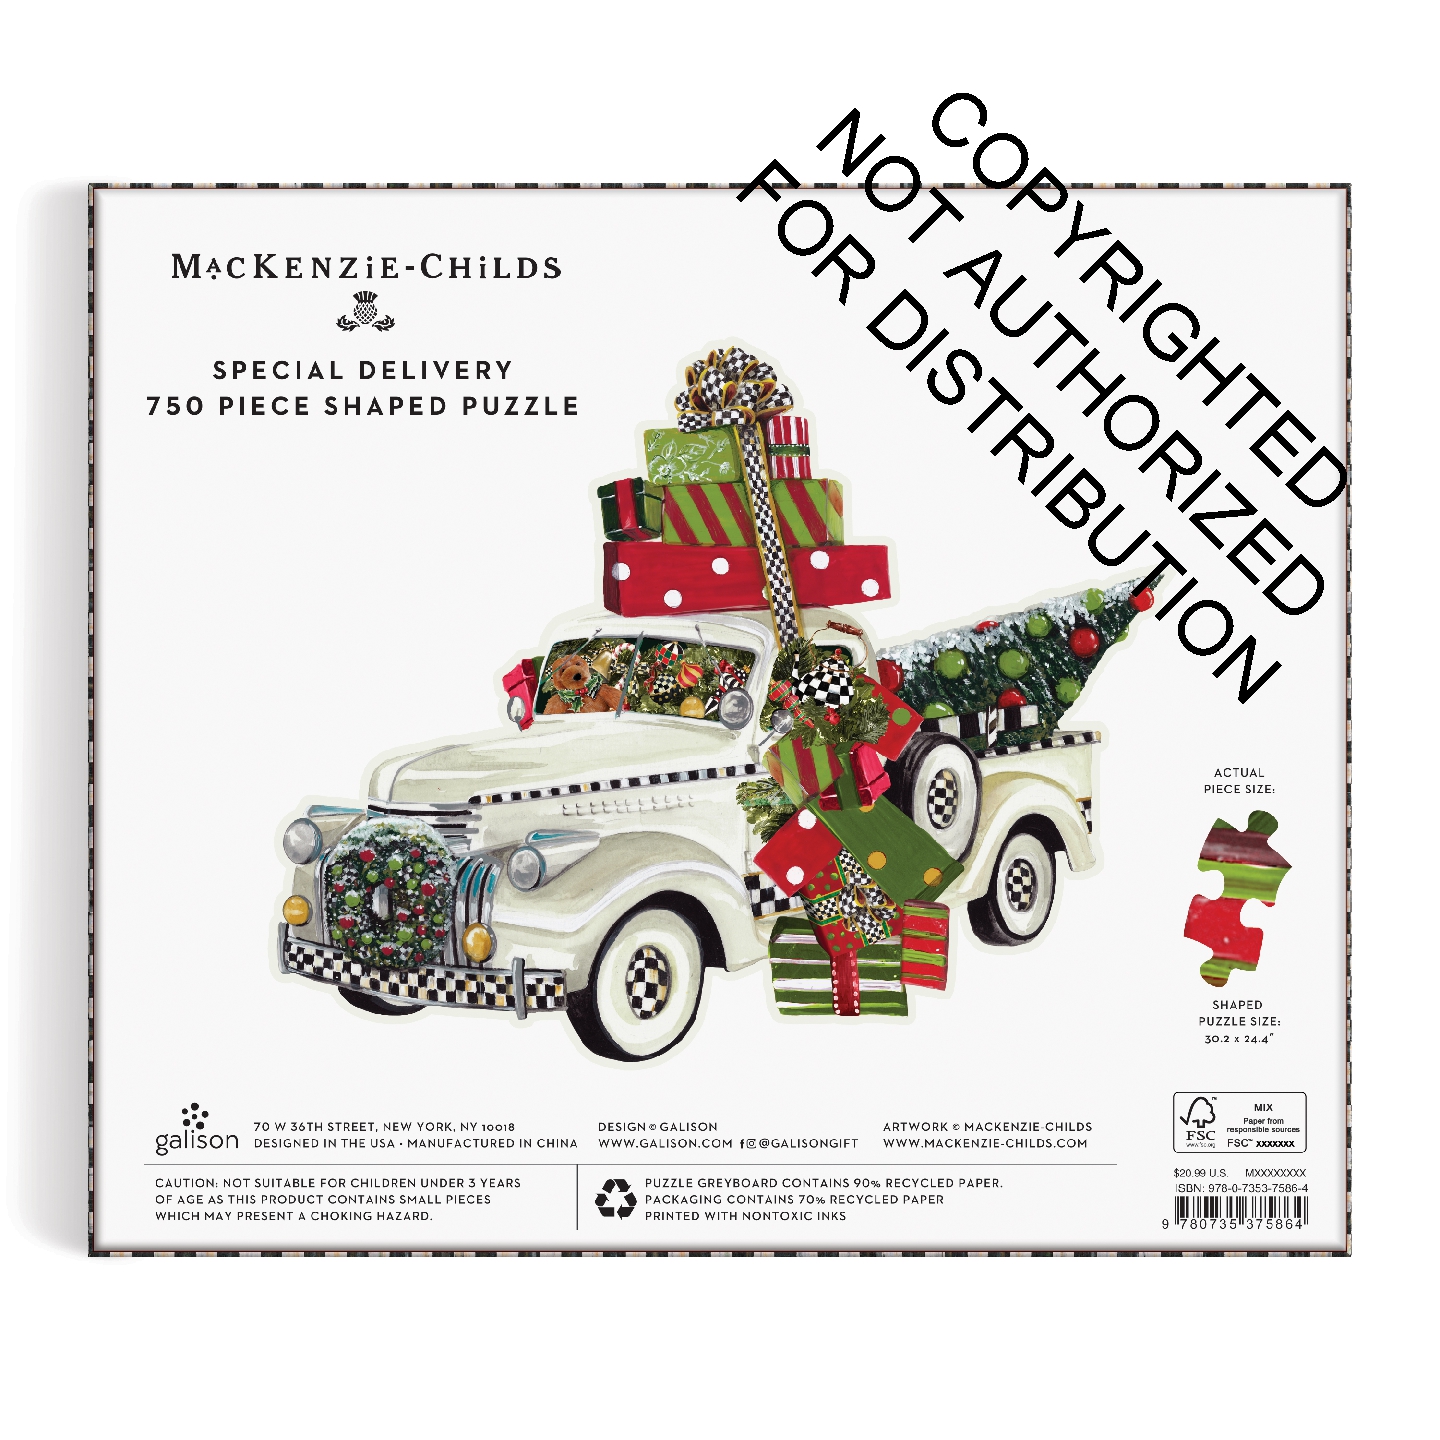 MacKenzie-Childs Special Delivery 750 Piece Shaped Puzzle